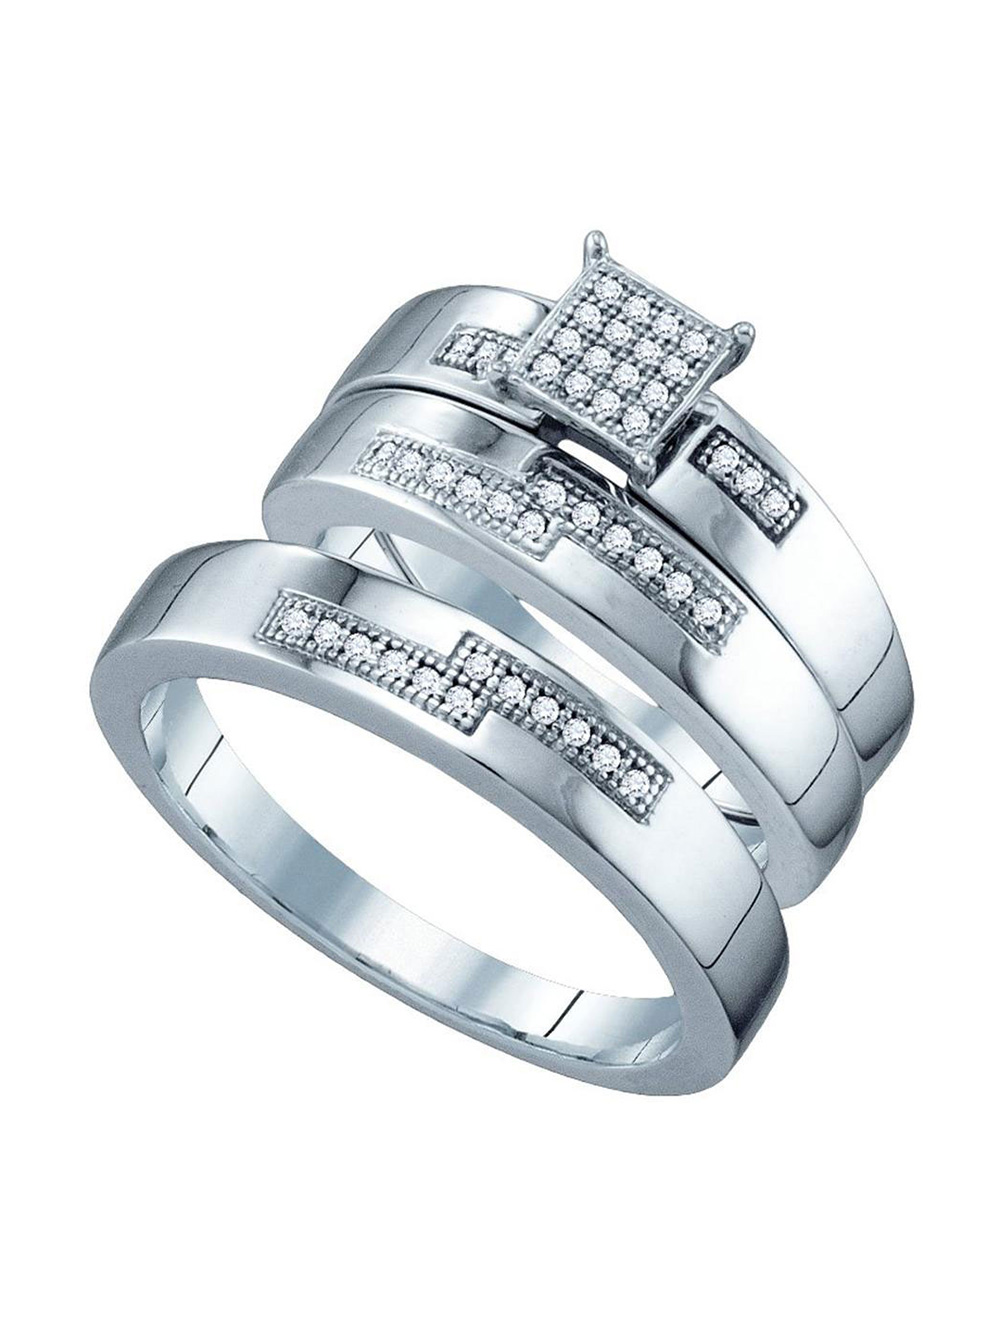 Solid 925 Sterling Silver His and Hers Round Diamond Square Matching ...